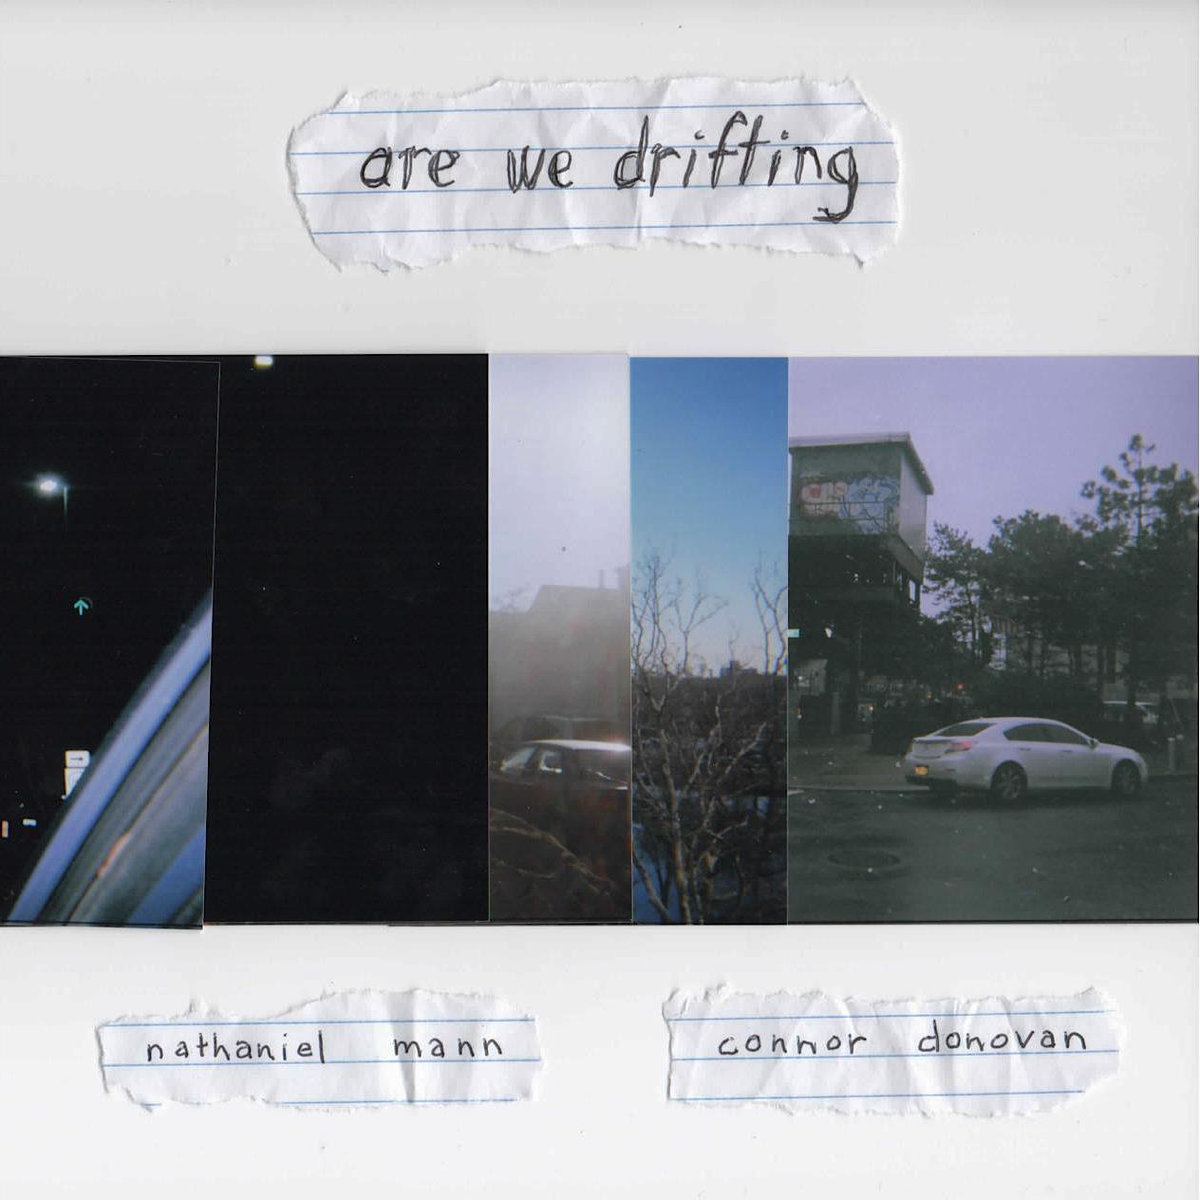 Free download: Connor Donovan & Nathaniel Mann – Are We Drifting